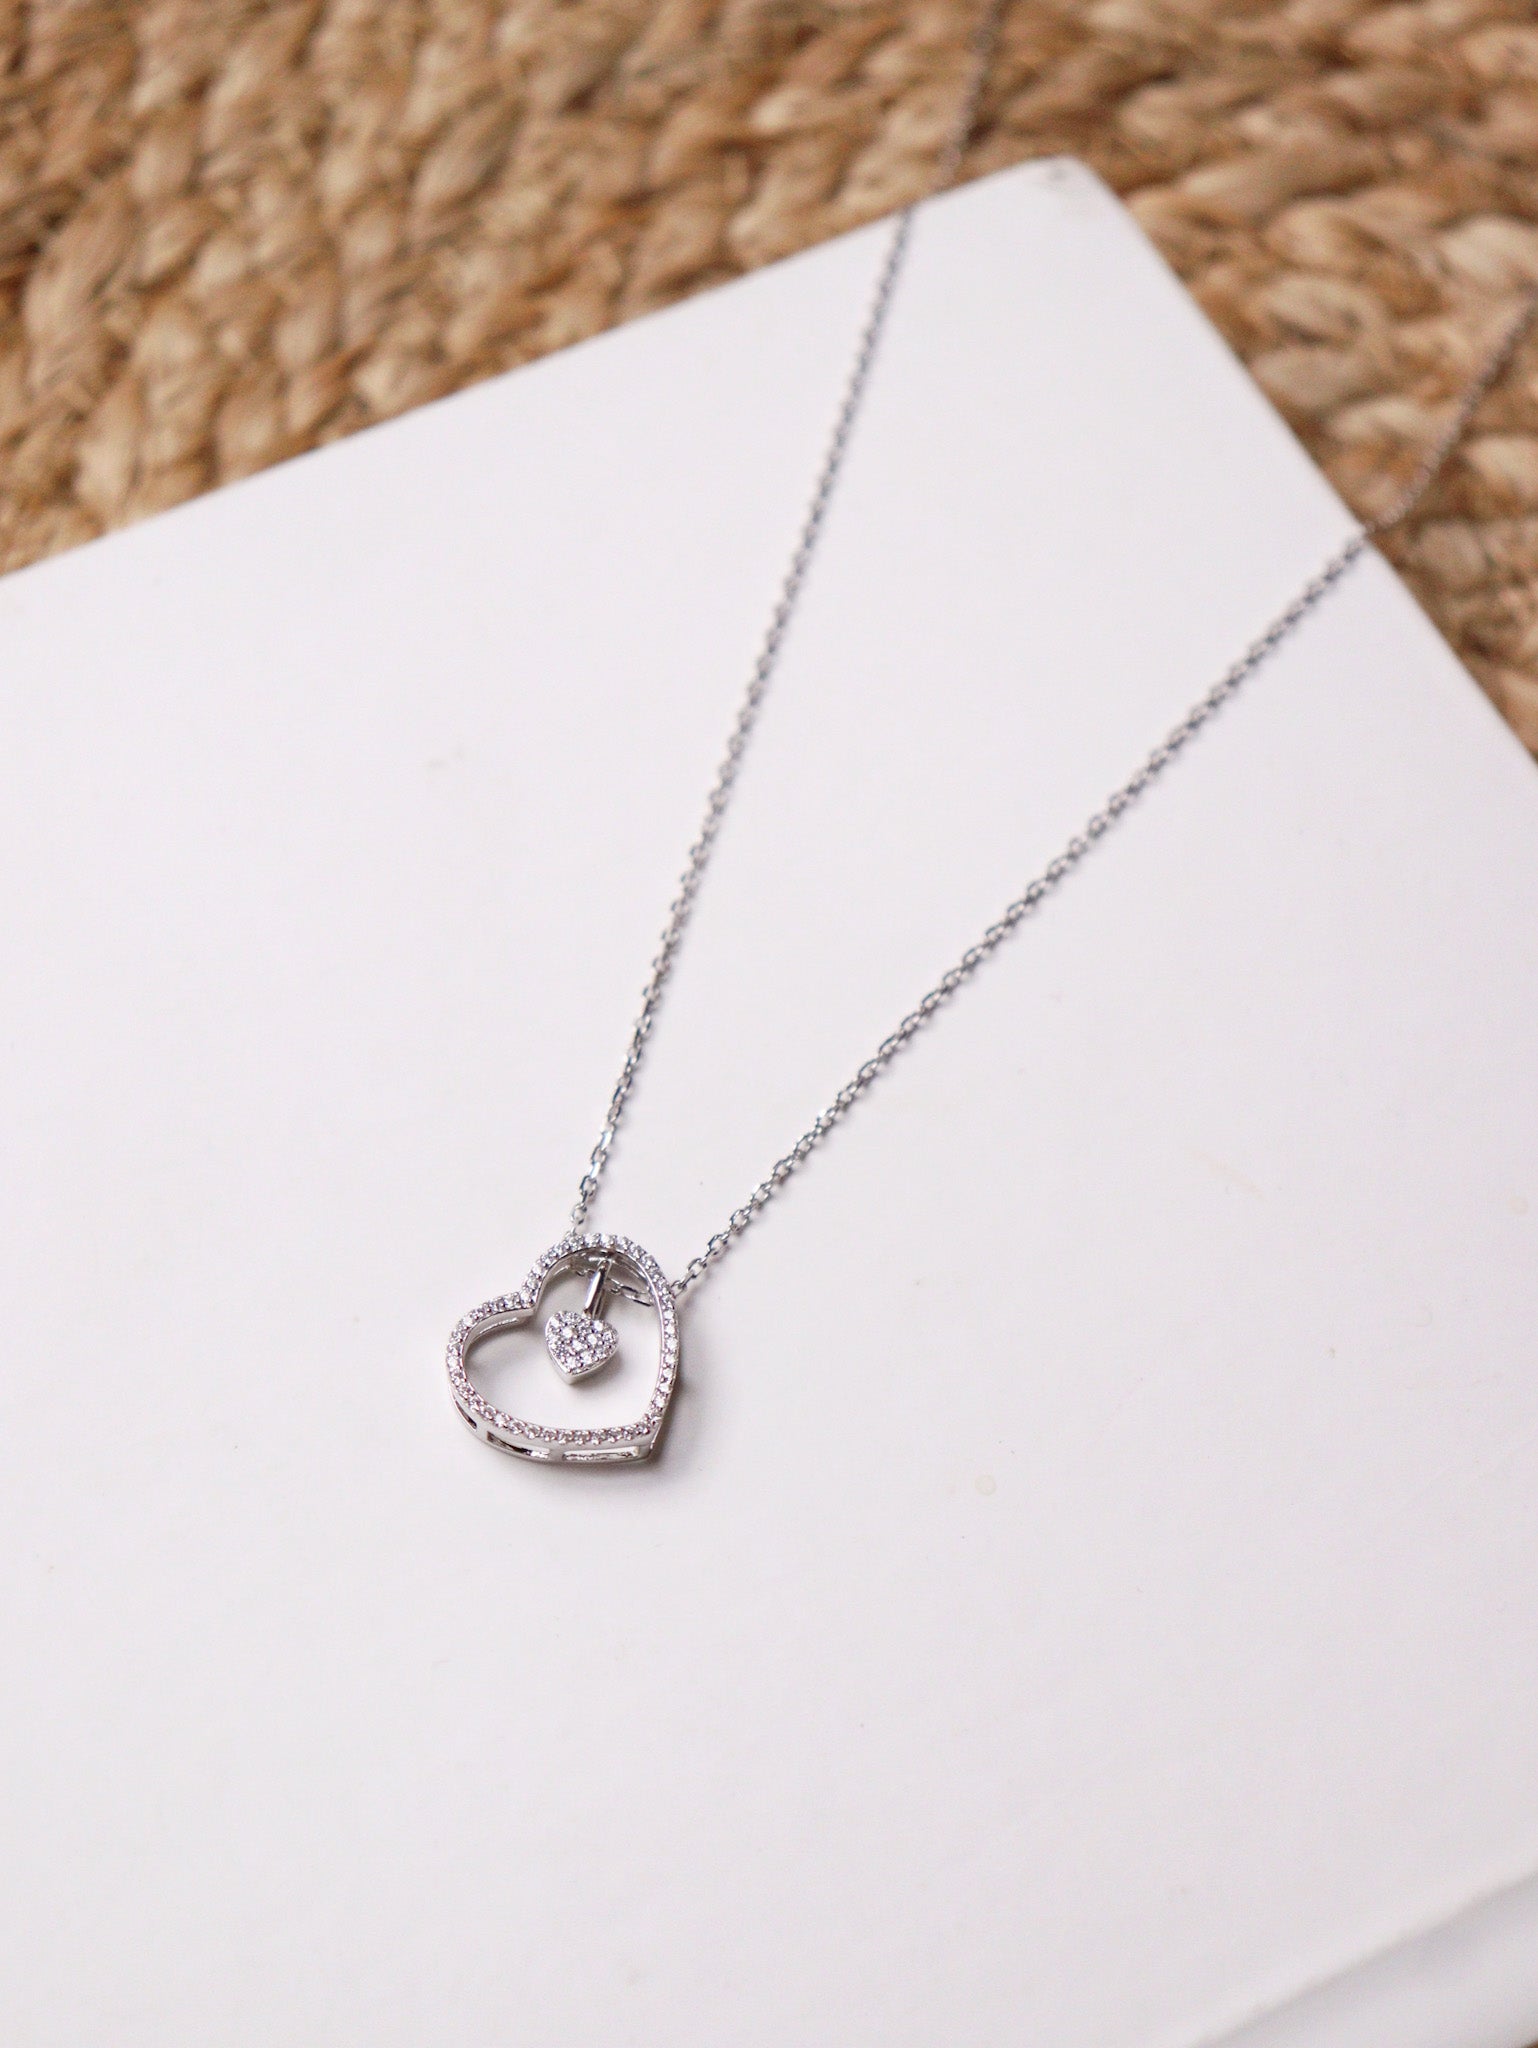  Pure Silver Art In Heart Necklace